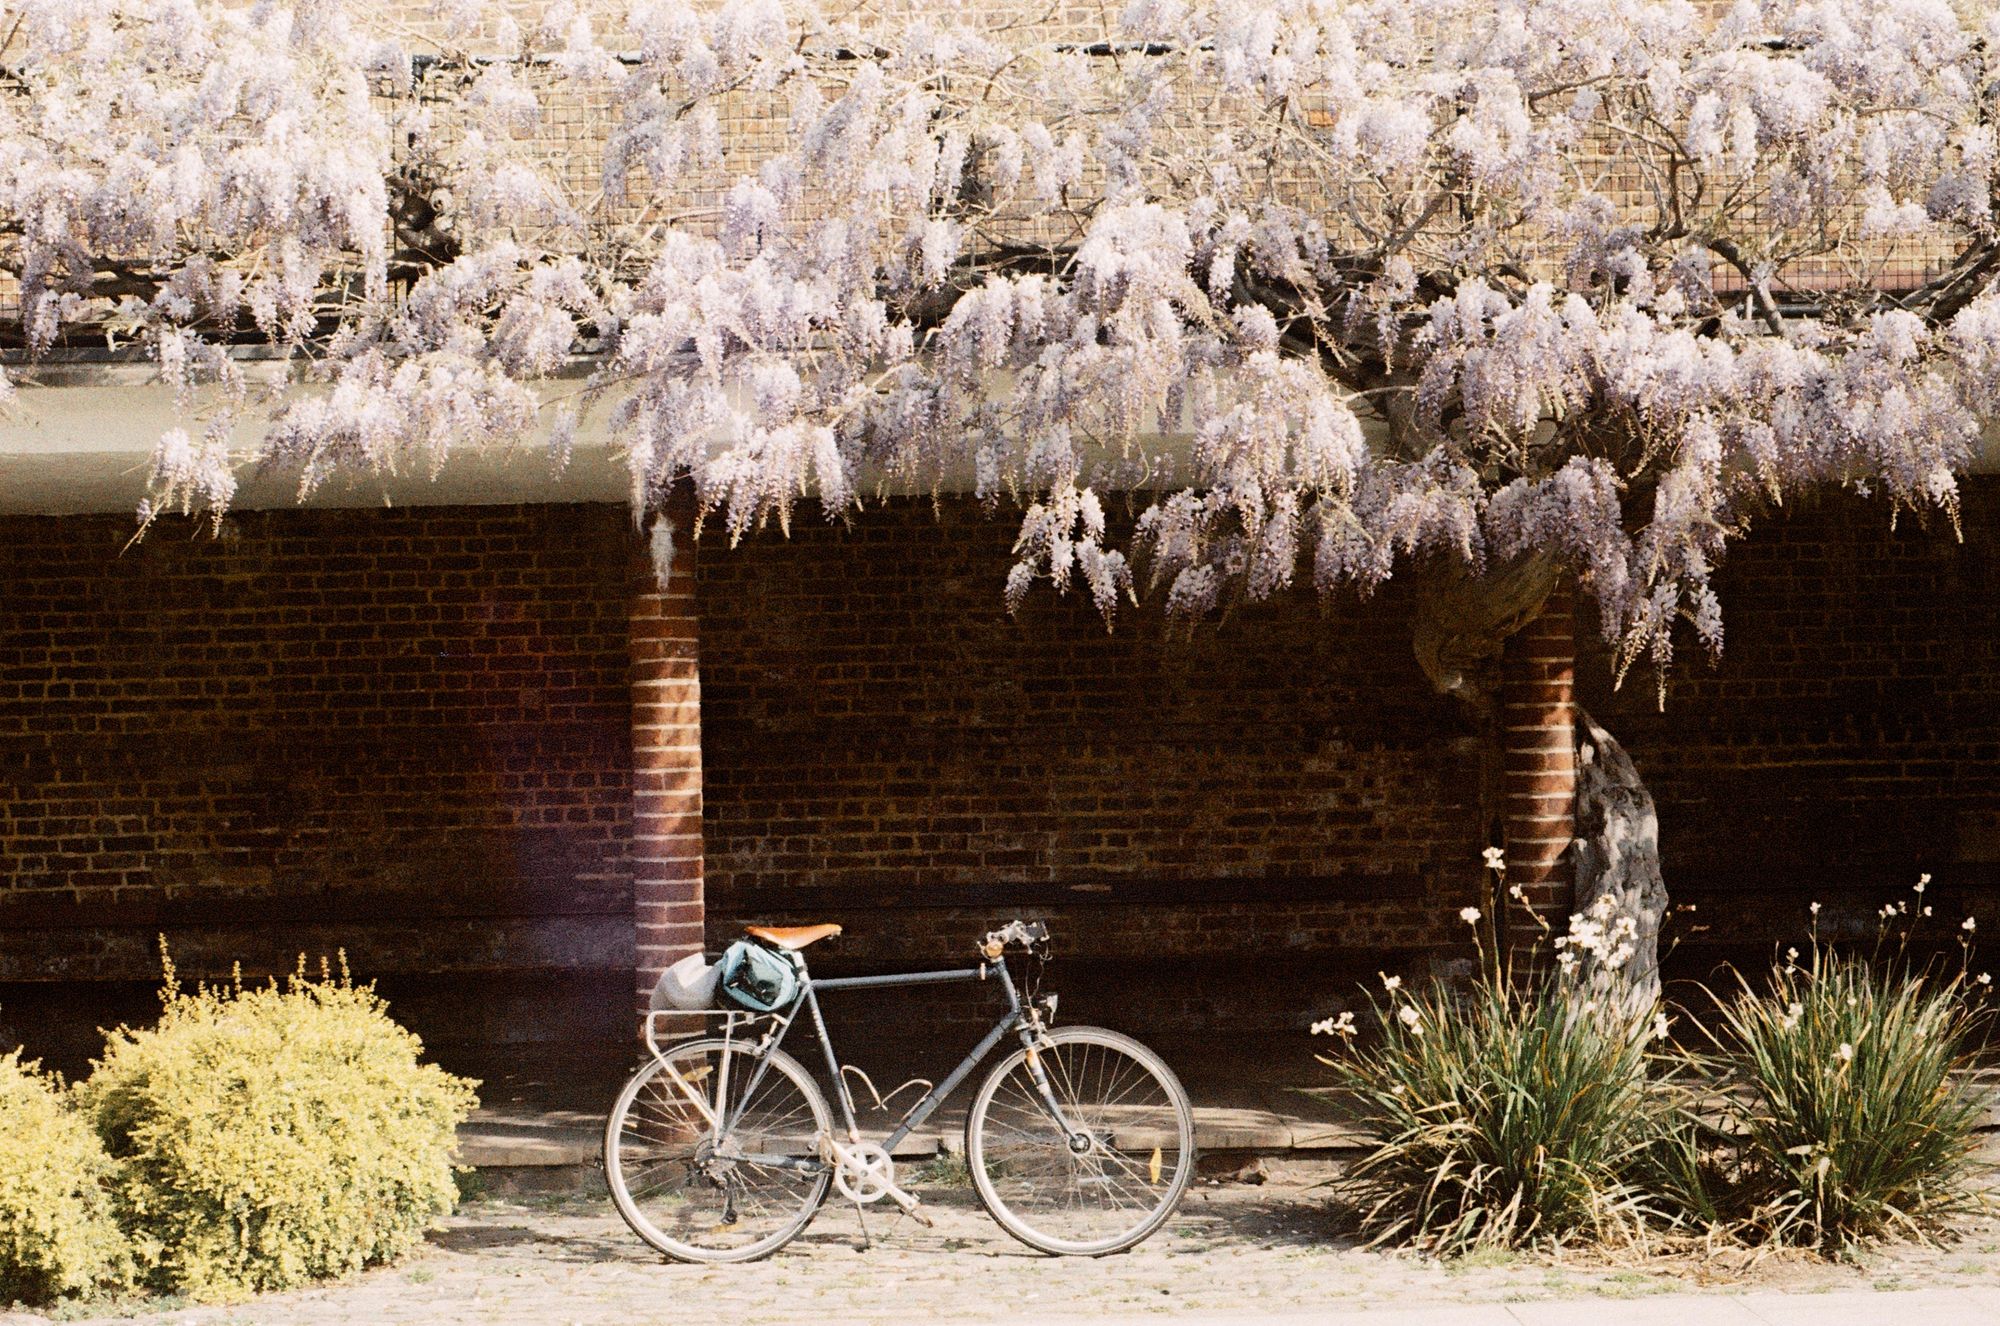 A blue bicycle on a stand under a colonnade with wisteria falling above. The wisteria looks oddly ghostly, barely purple and with a pinkish cast.